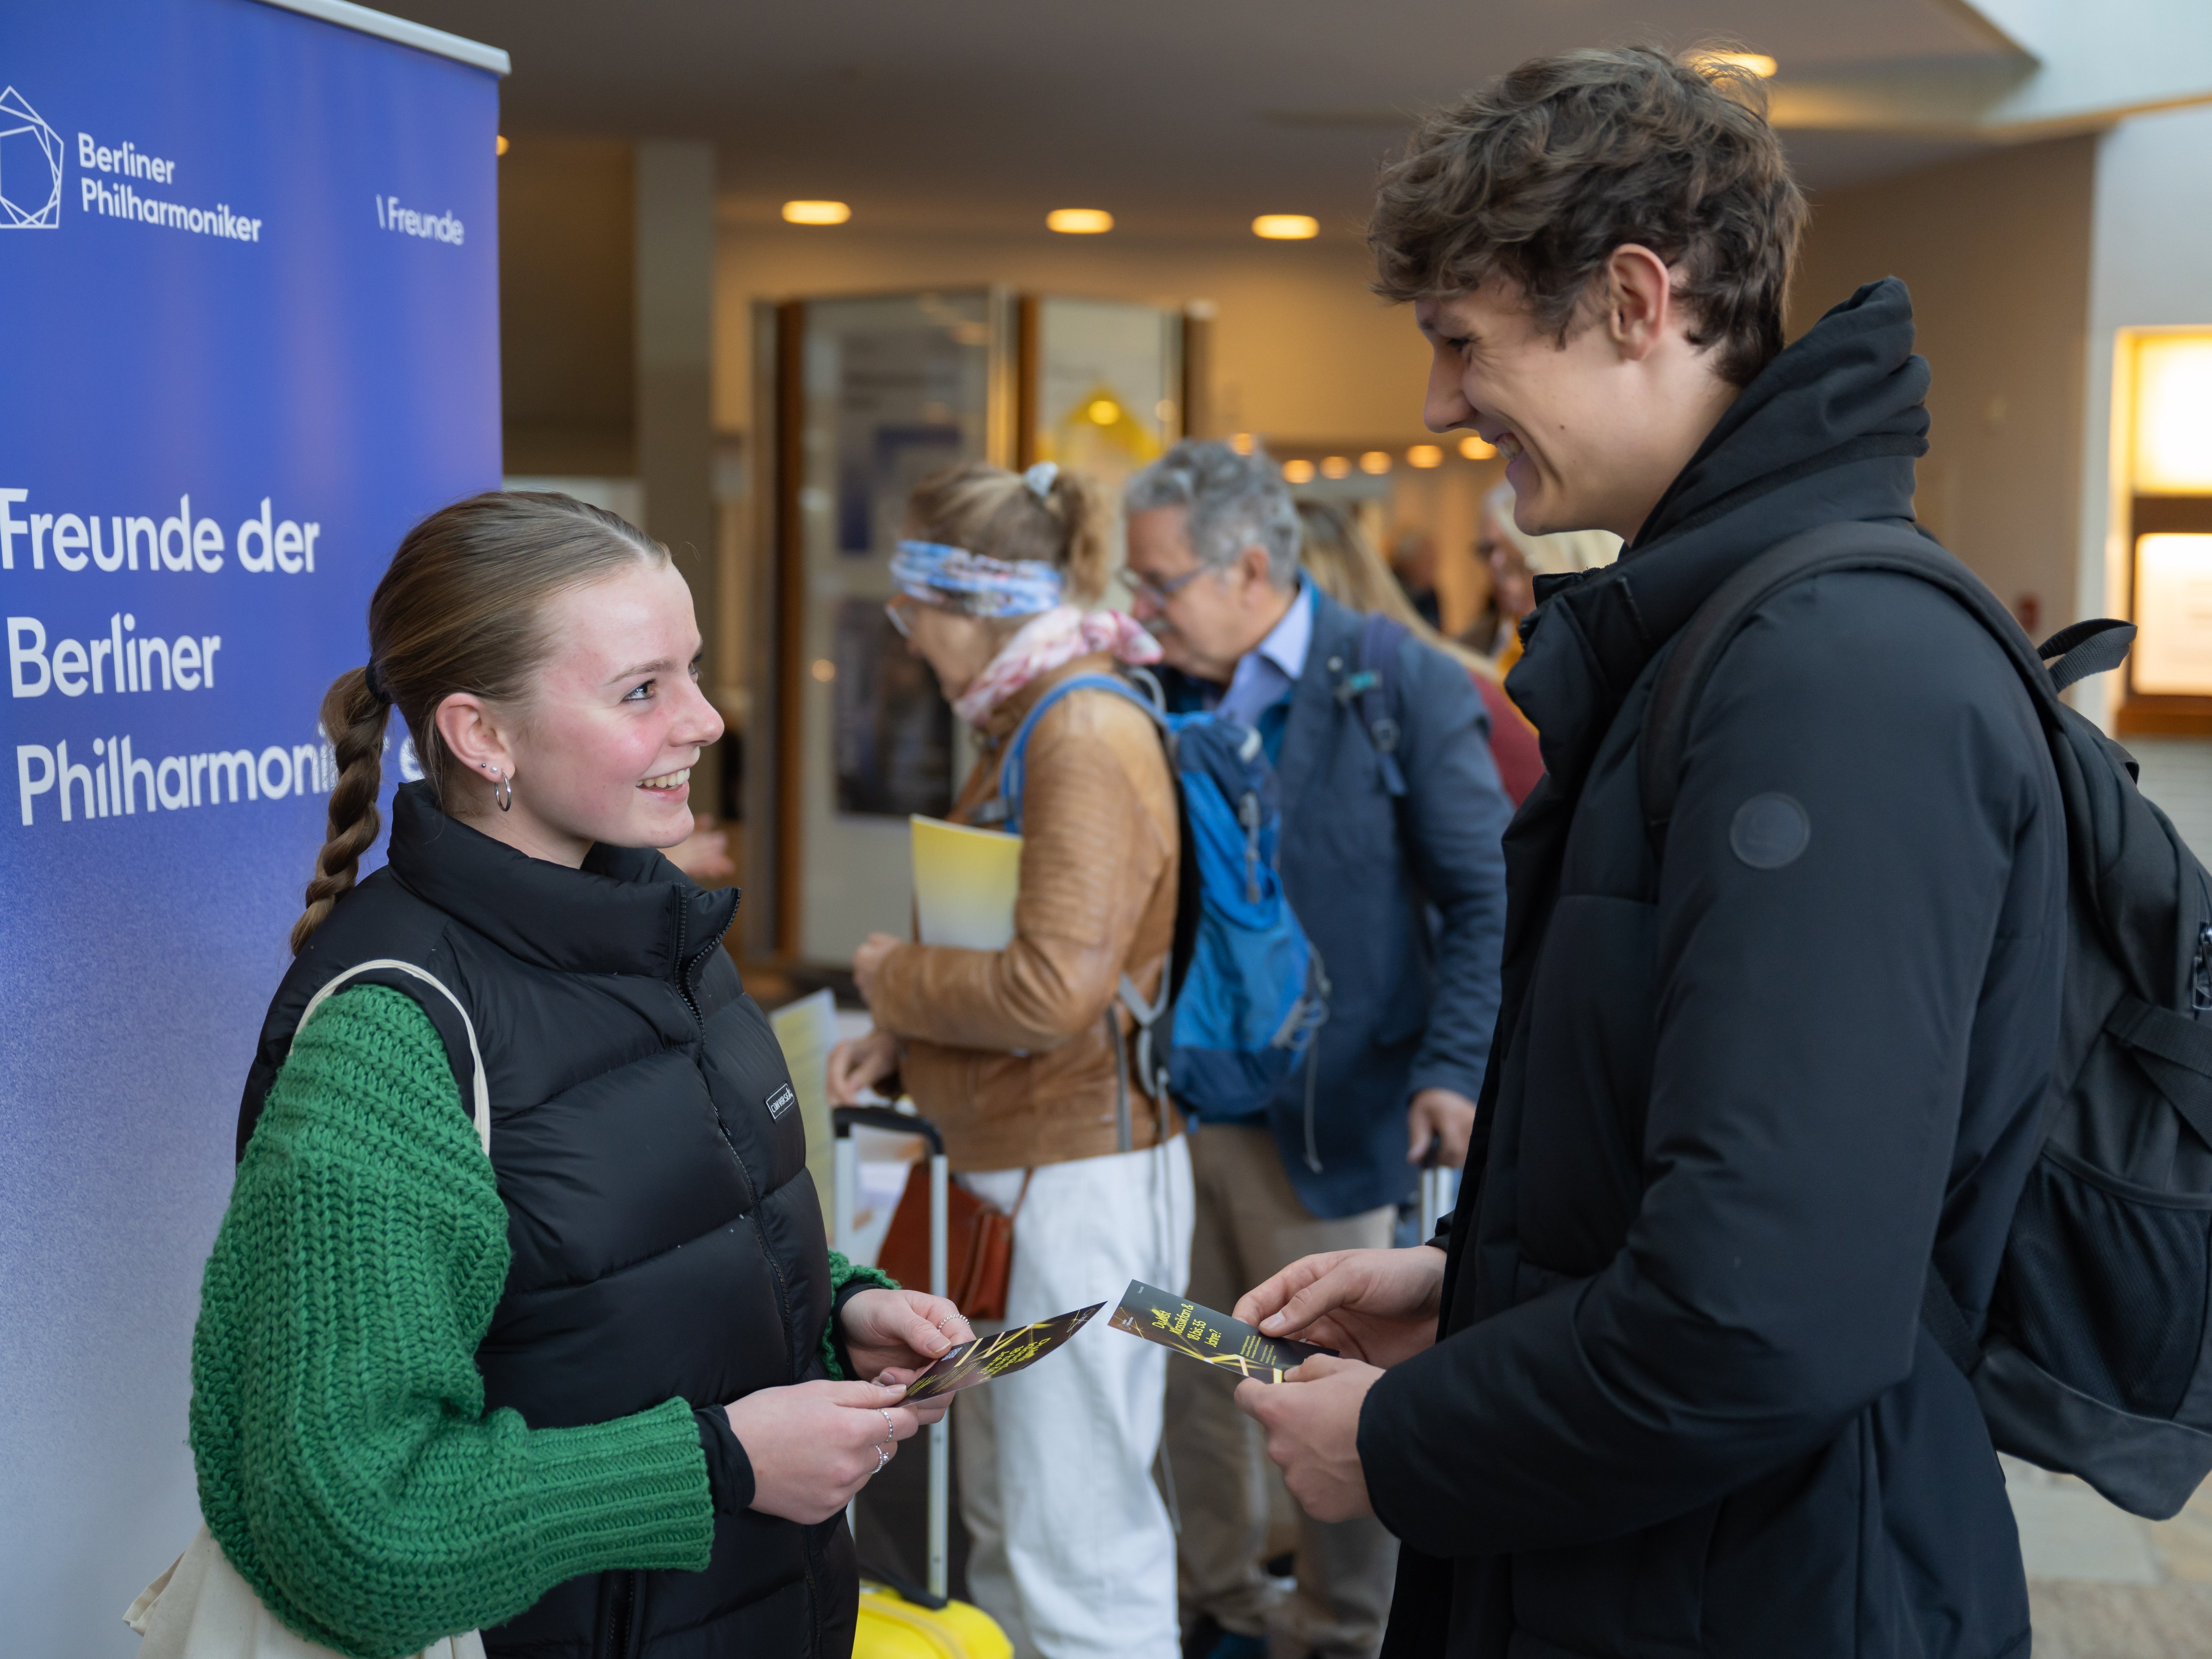 Several people are standing in the foyer of the Berlin Philharmonie, chatting. Some are holding programme booklets. The background shows other guests and architectural details of the foyer.